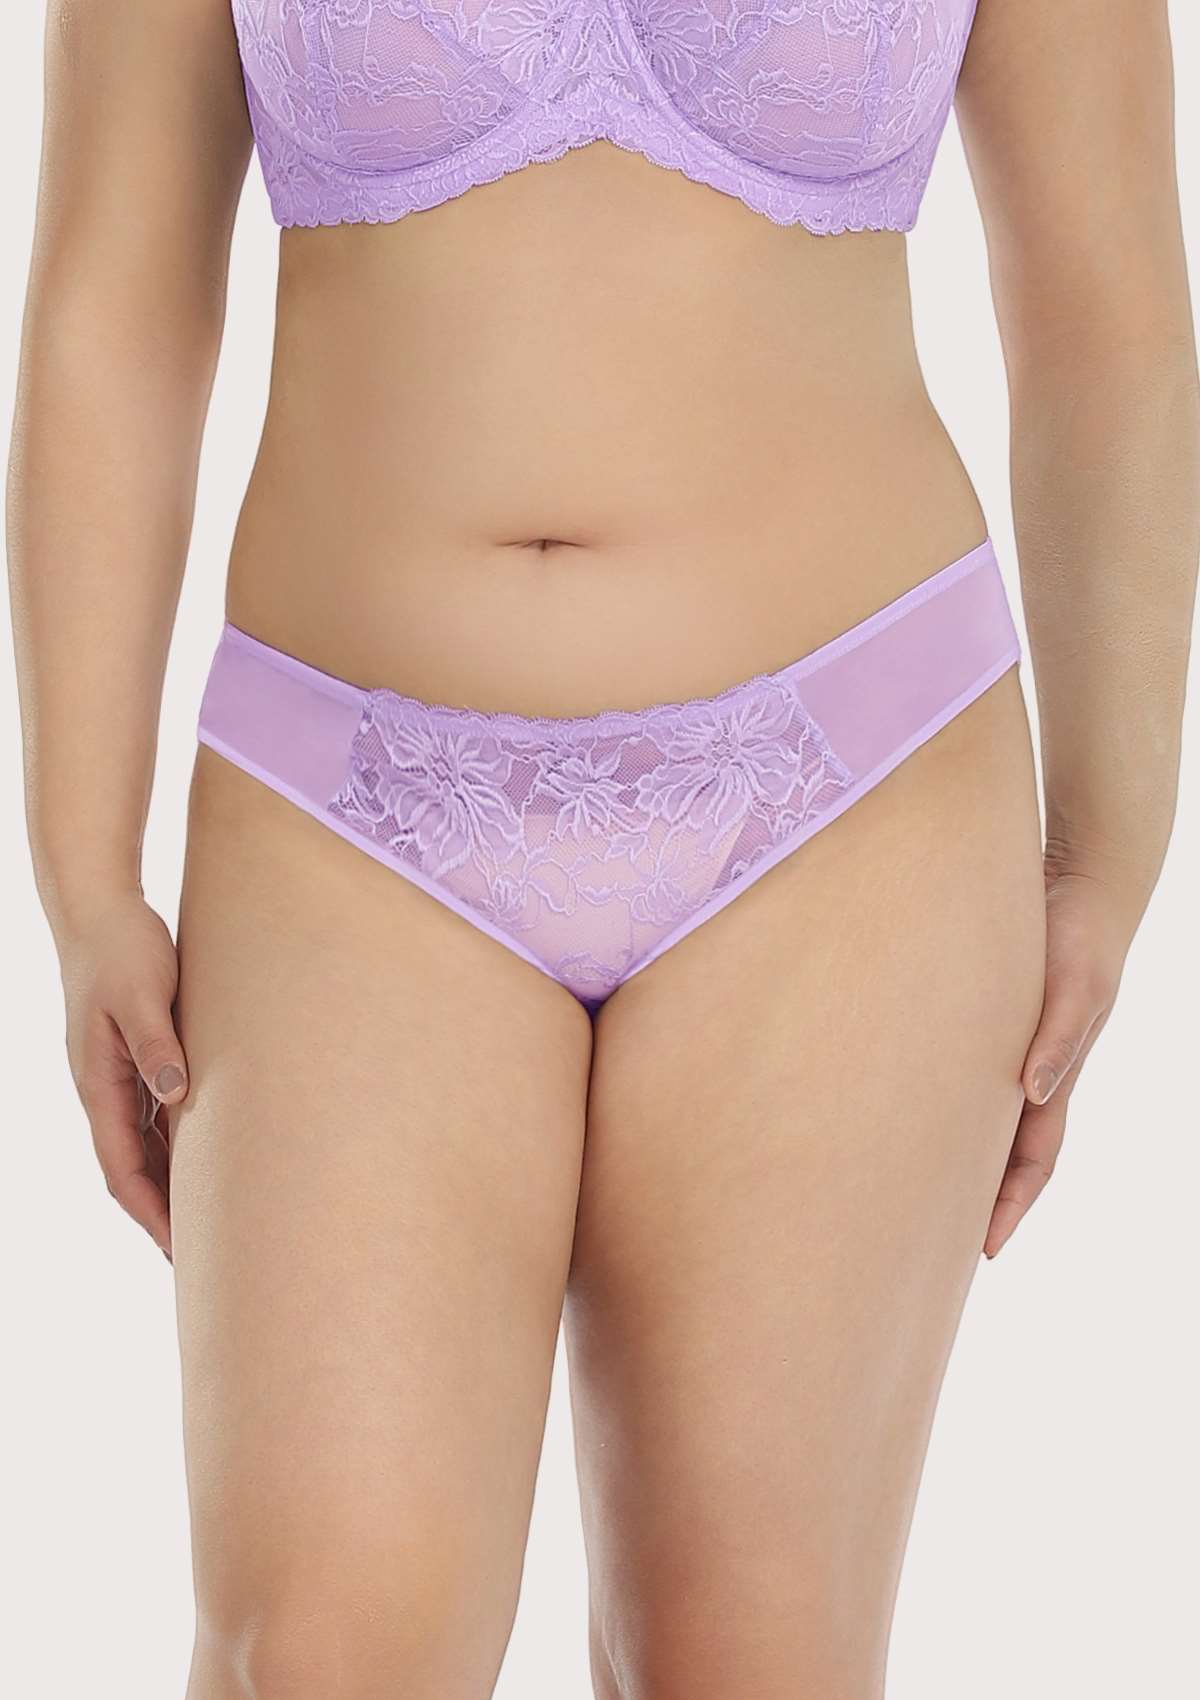 HSIA Mid-Rise Delicate Lace Sheer Underwear, Breathable And Comfortable - XXL / Purple